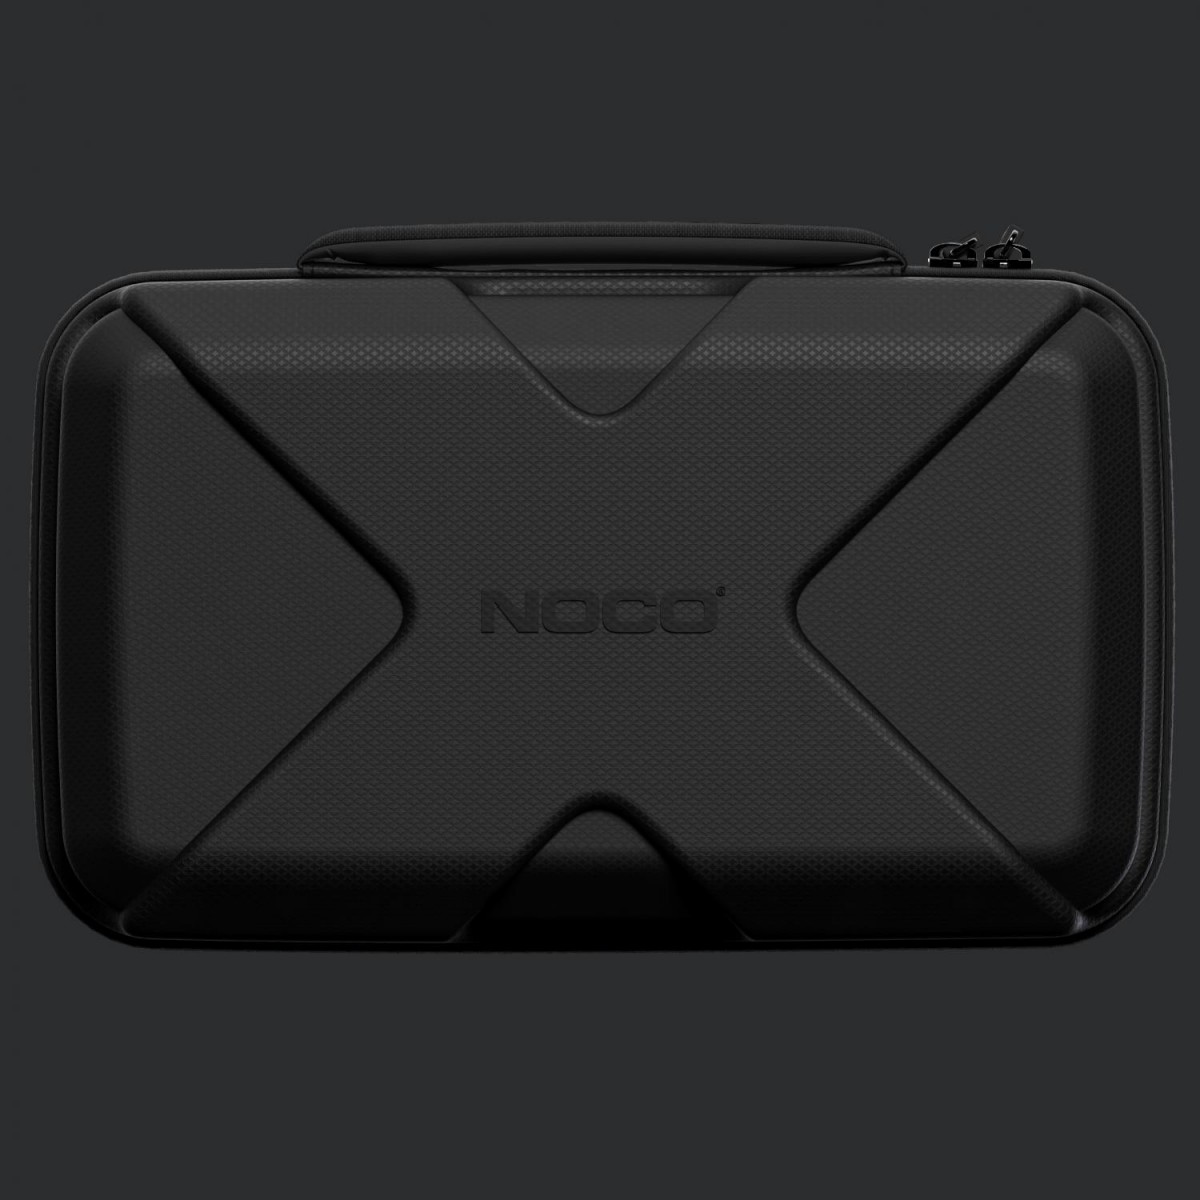 NOCO - GBC102 EVA Protective Case For GBX55 UltraSafe Lithium Jump Starter